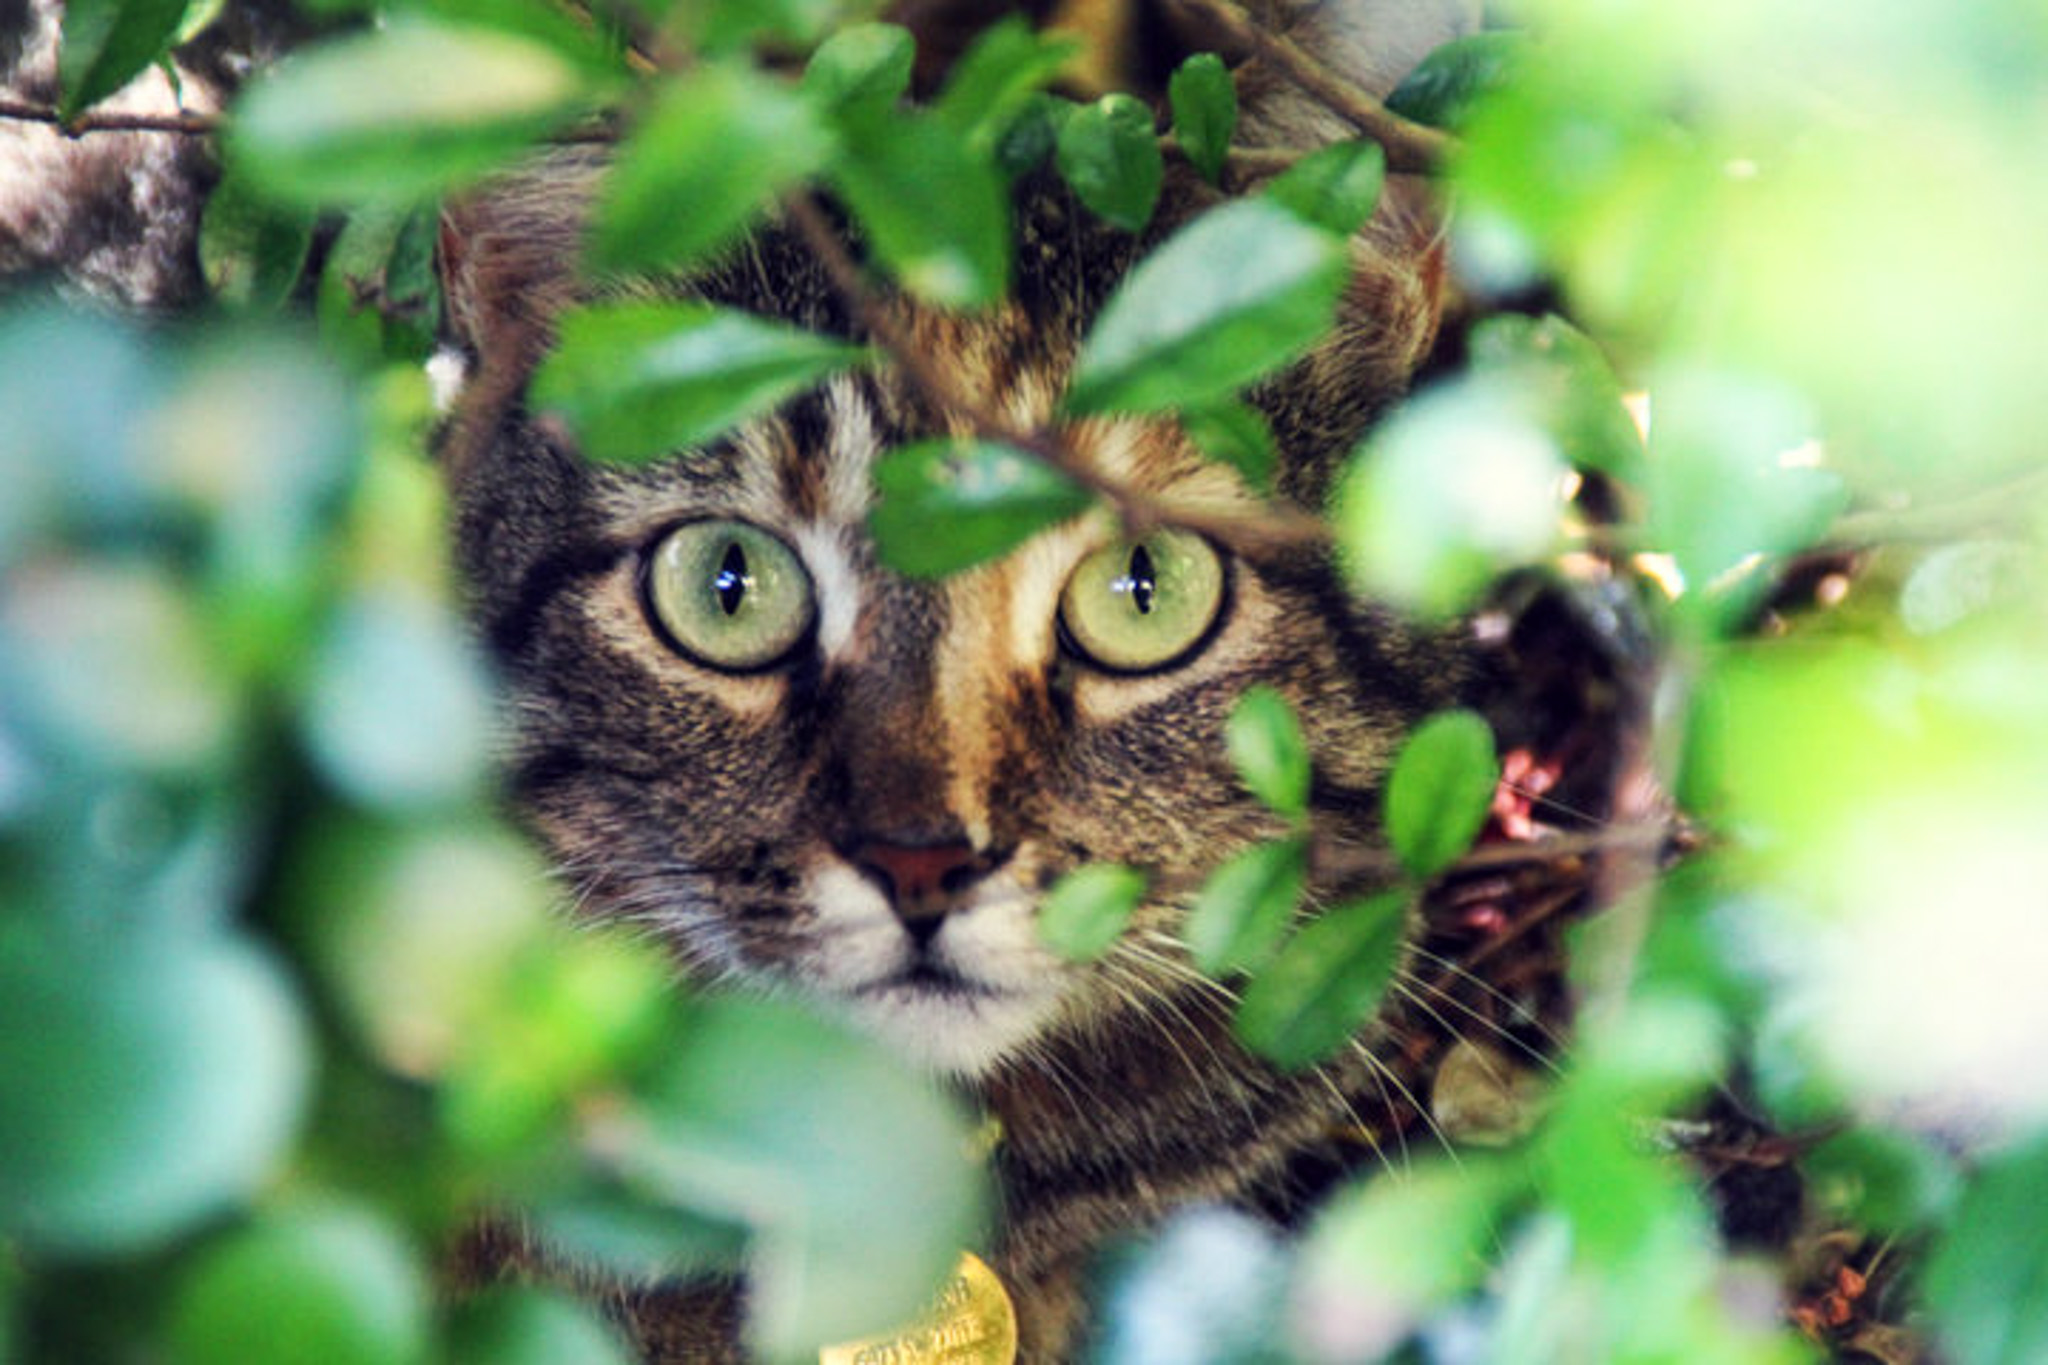 Ginger, a Tabby hiding in the bushes